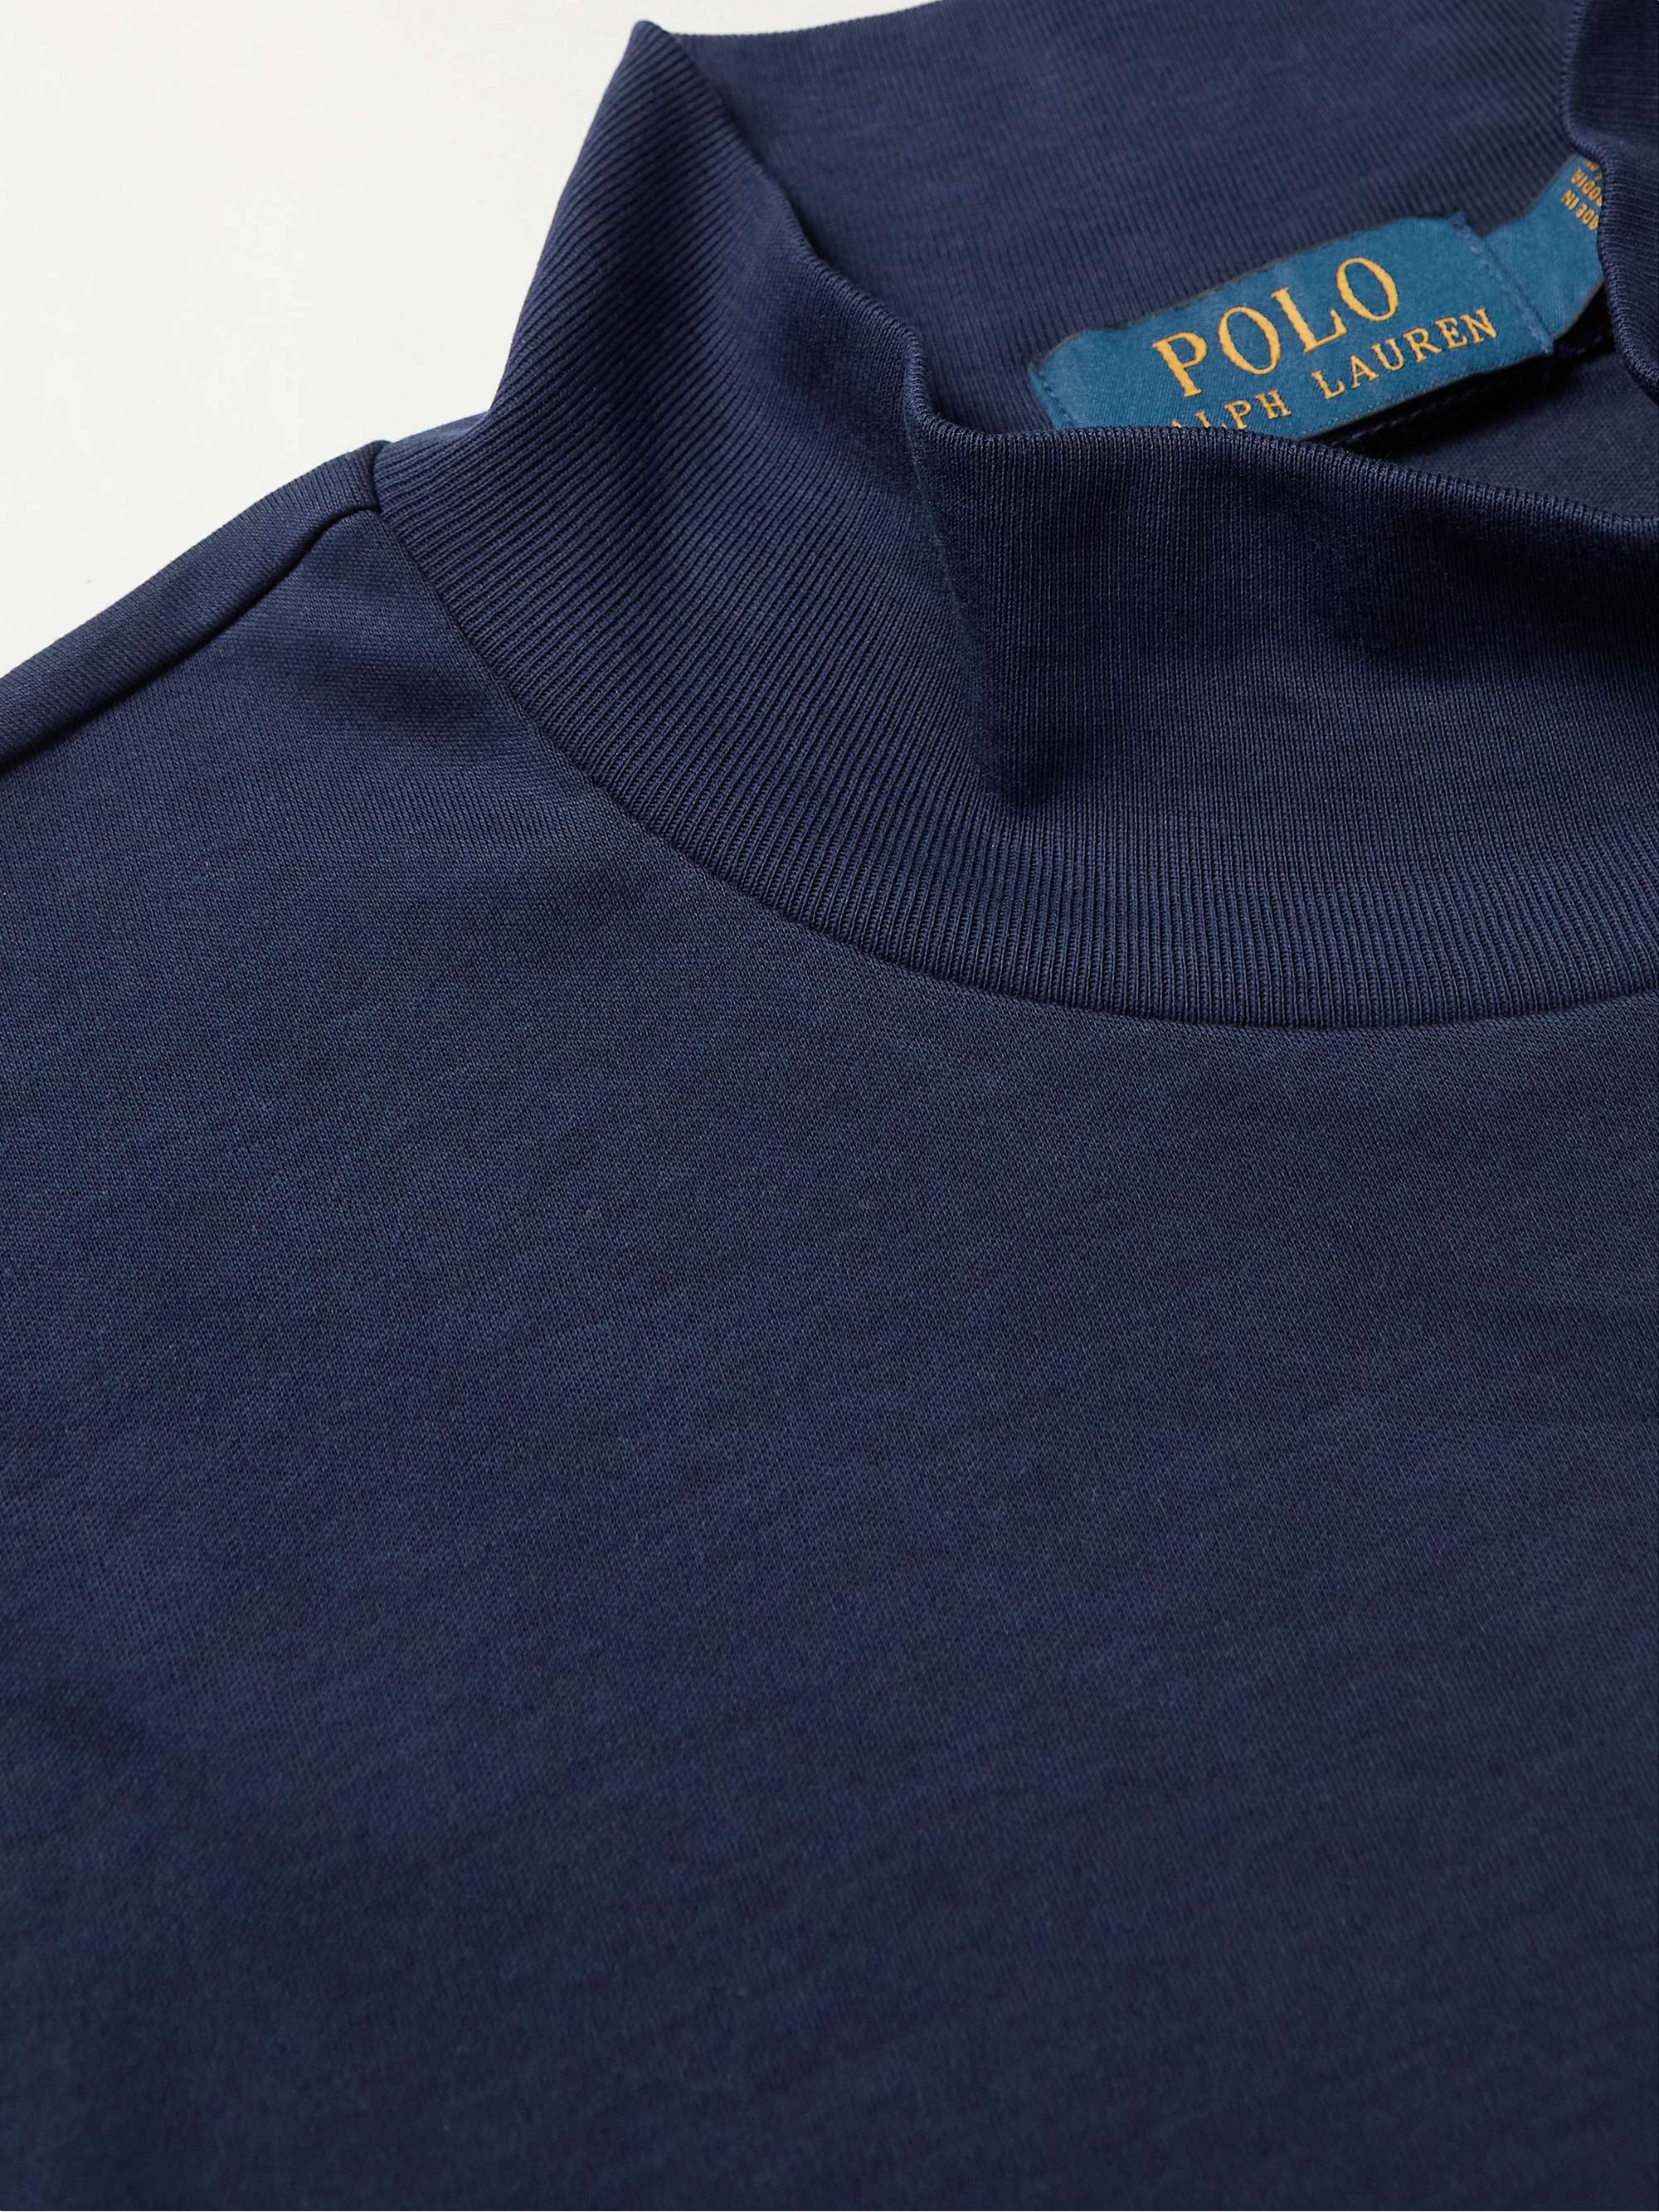 POLO RALPH LAUREN Logo-Embroidered Cotton-Jersey Sweater